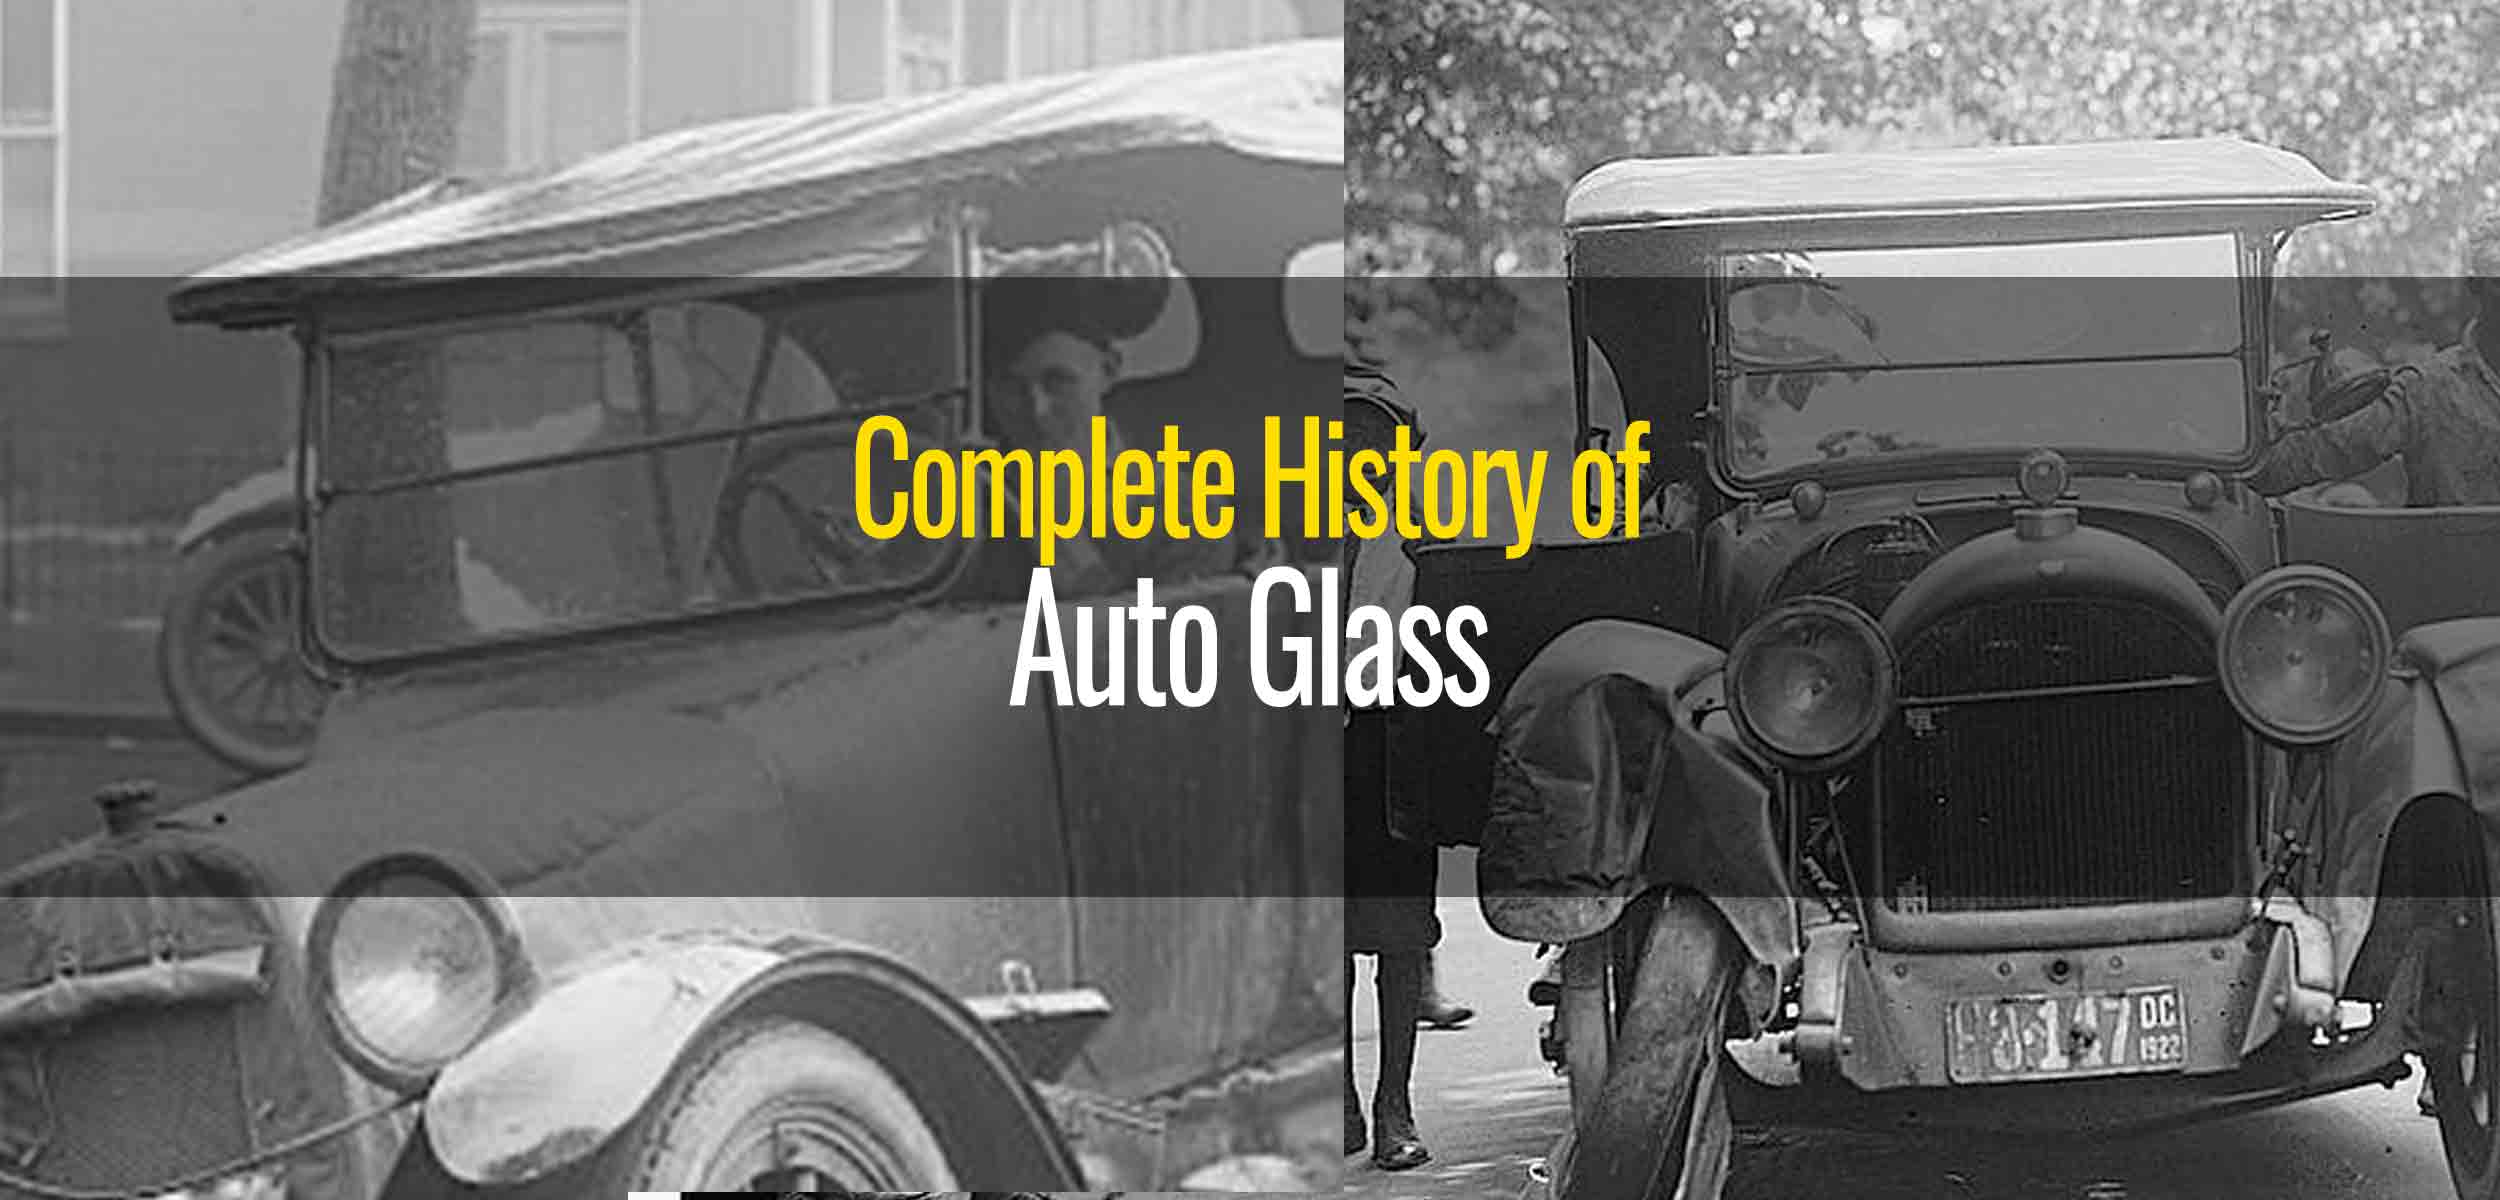 History of Auto Glass Windshields - From Ford to Gorilla